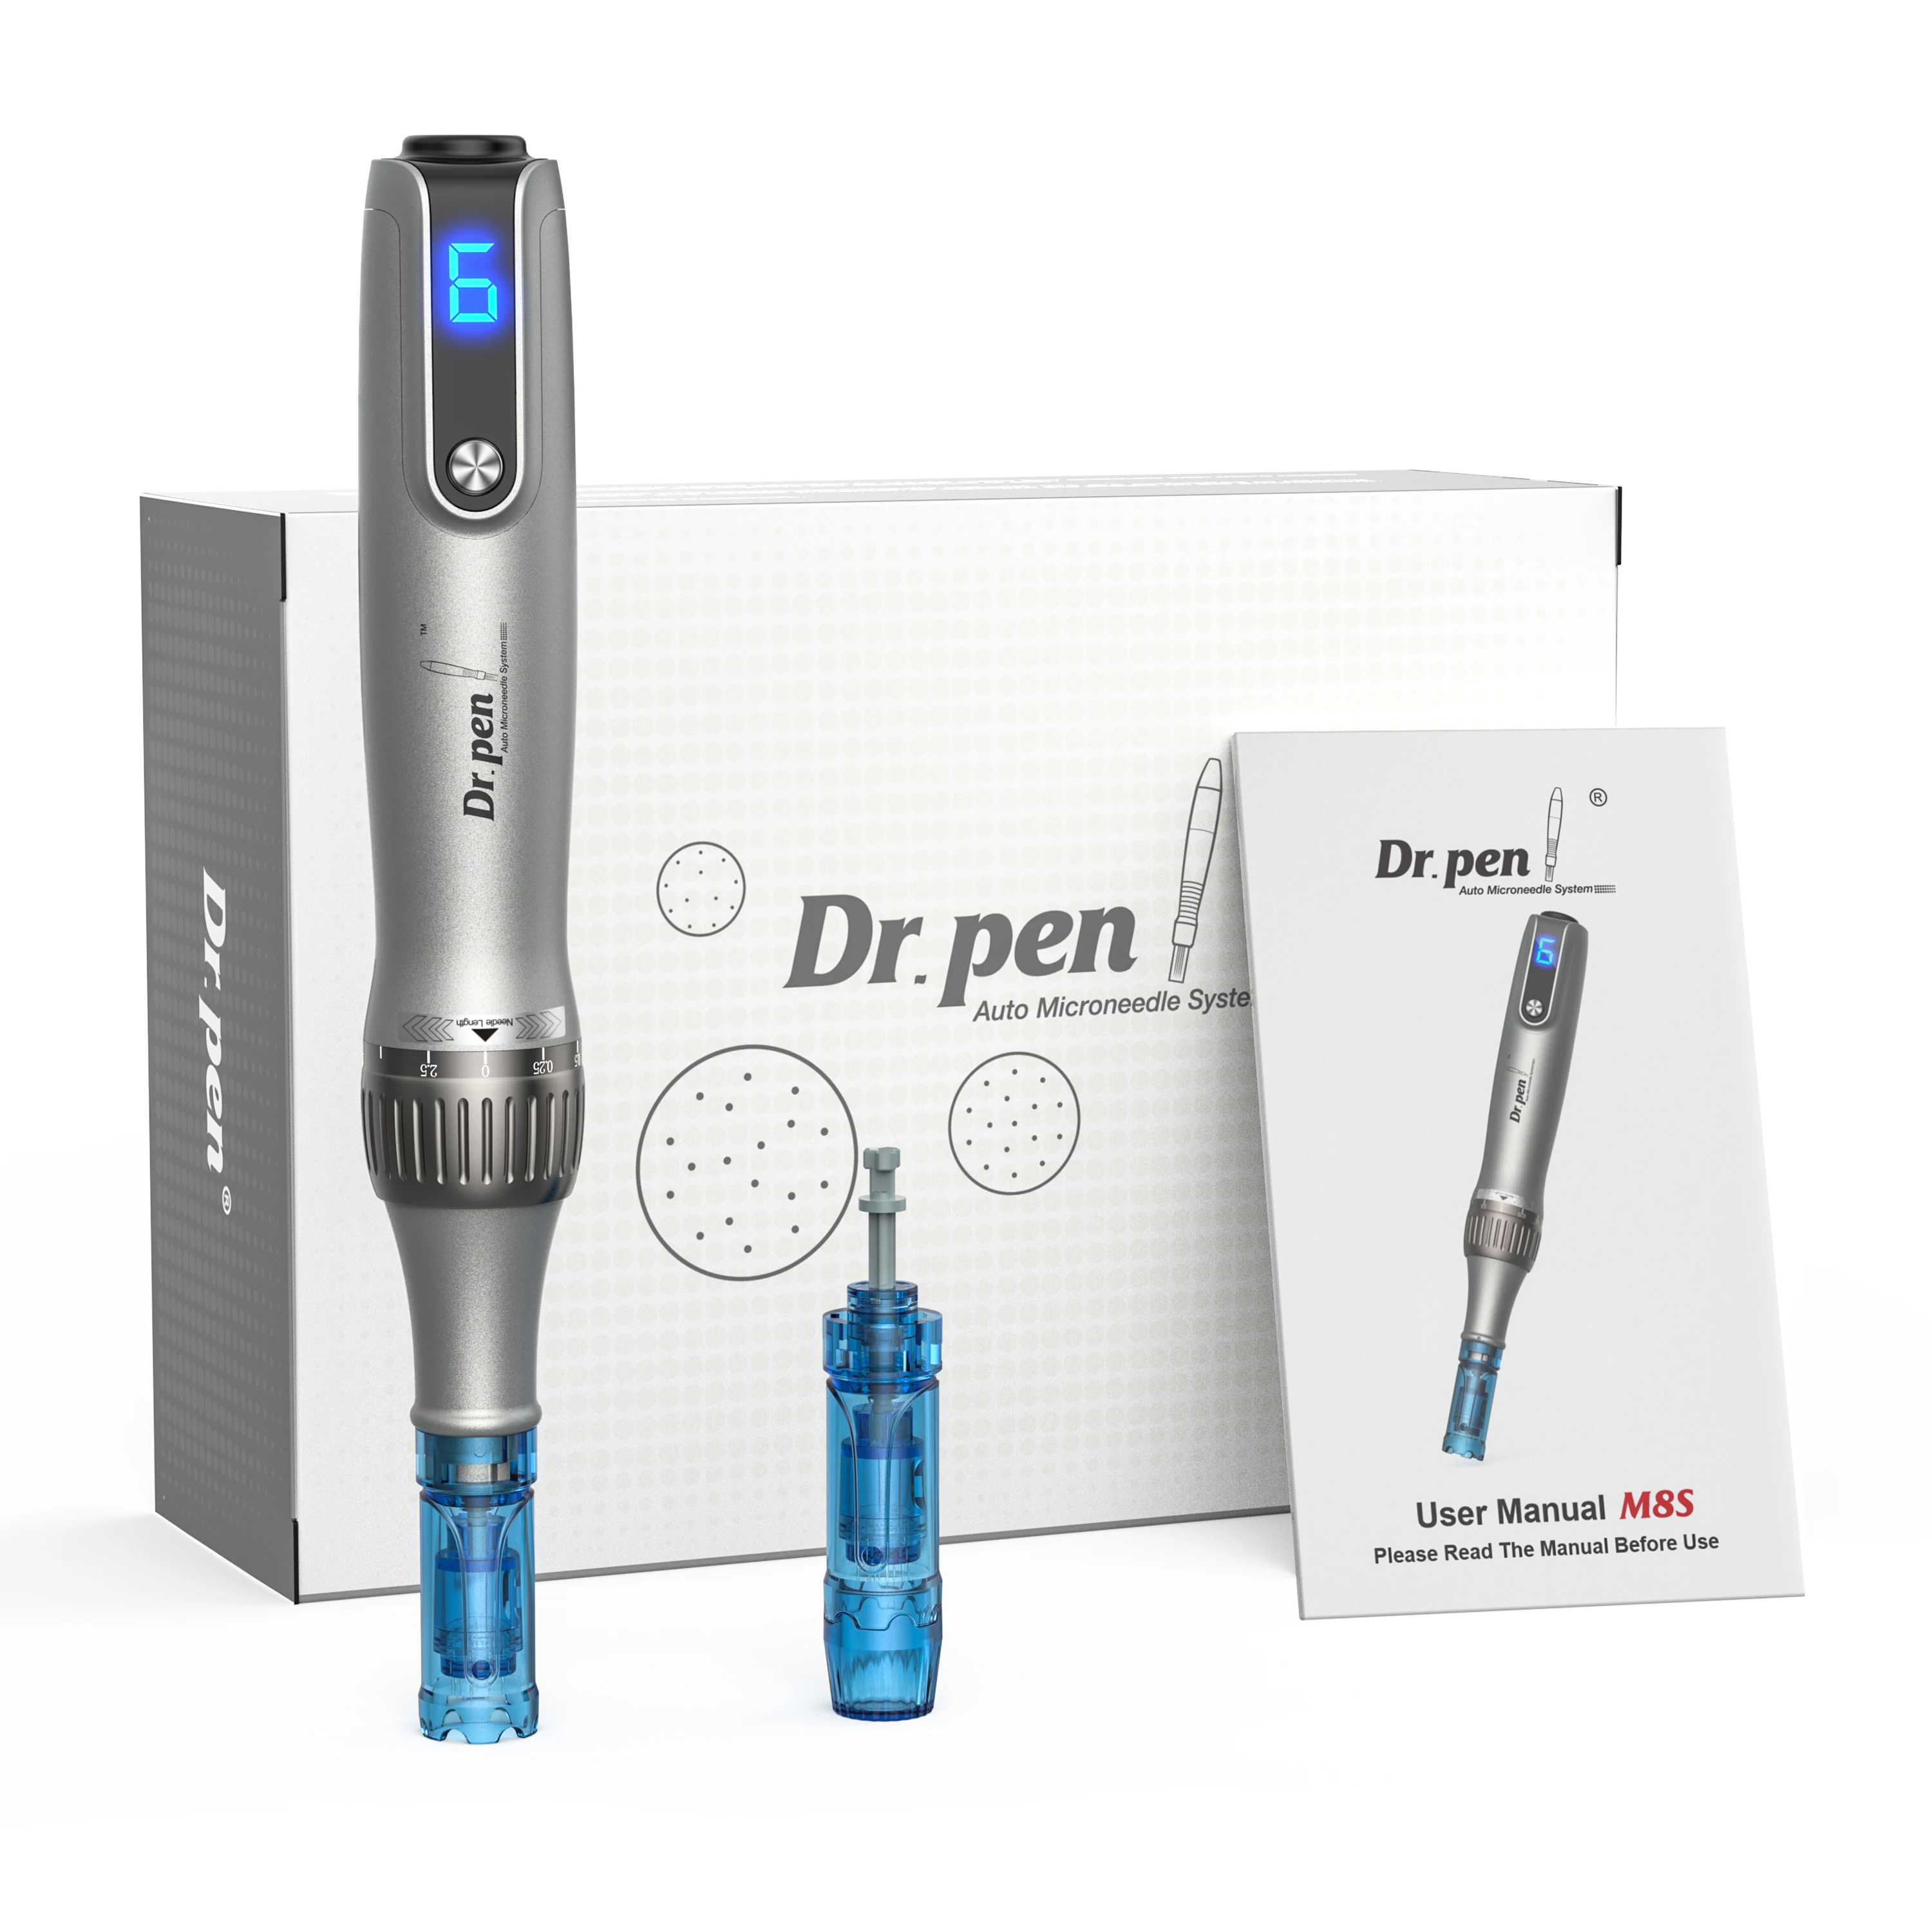 Genuine/Original Dr. pen M8S New Trending Electronic Cordless Dermapen Professional MicroNeedling  With Backflow Prevention